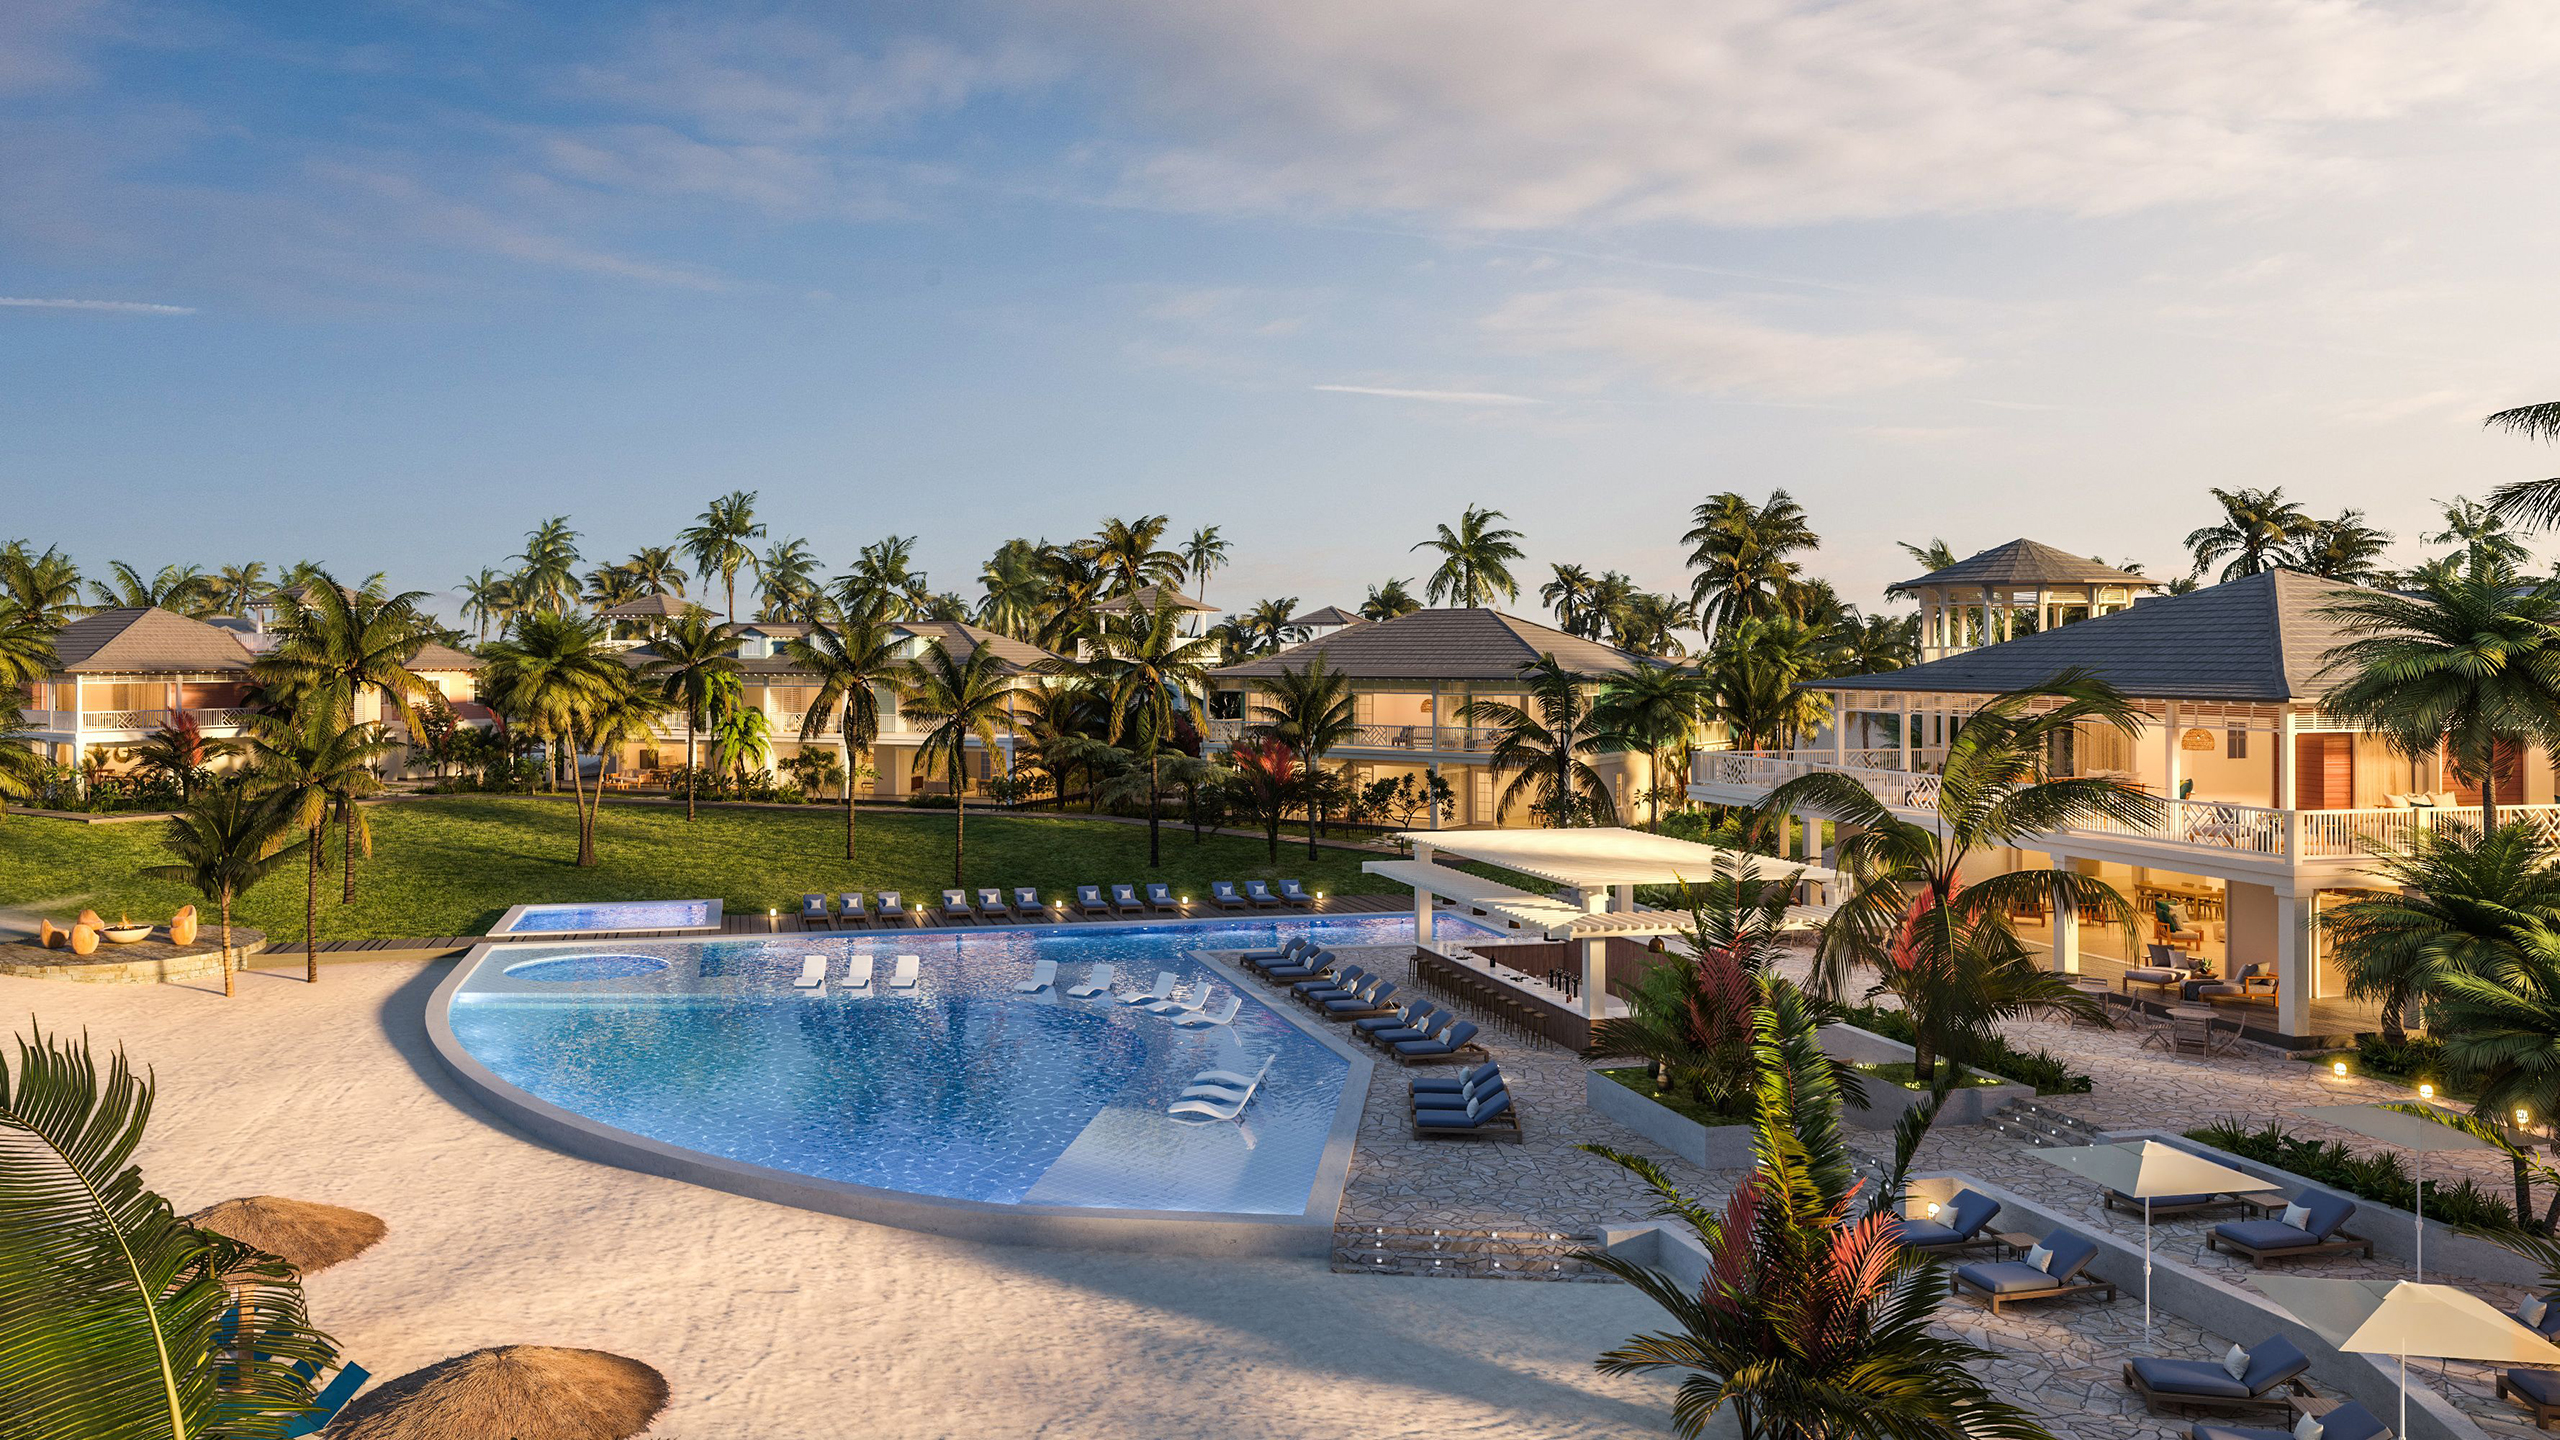 The Cays Villas at The Abaco Club